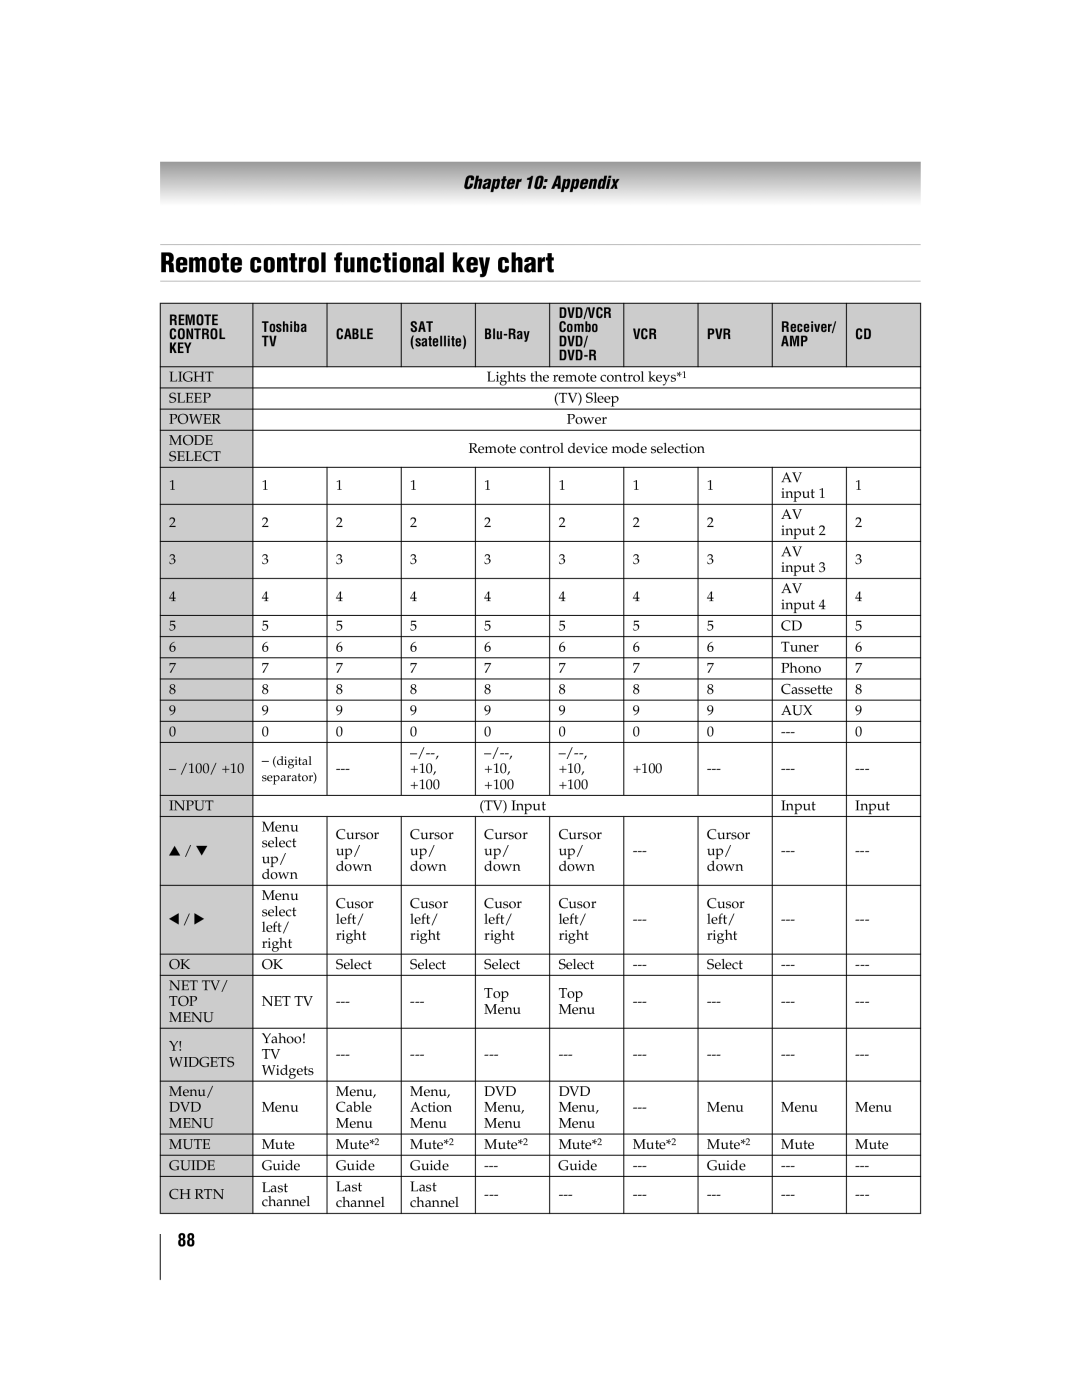 Toshiba 46WX800 Remote control functional key chart, Appendix, Toshiba, Dvd/Vcr, Cable, Blu-Ray, Combo, Control, Dvd-R 